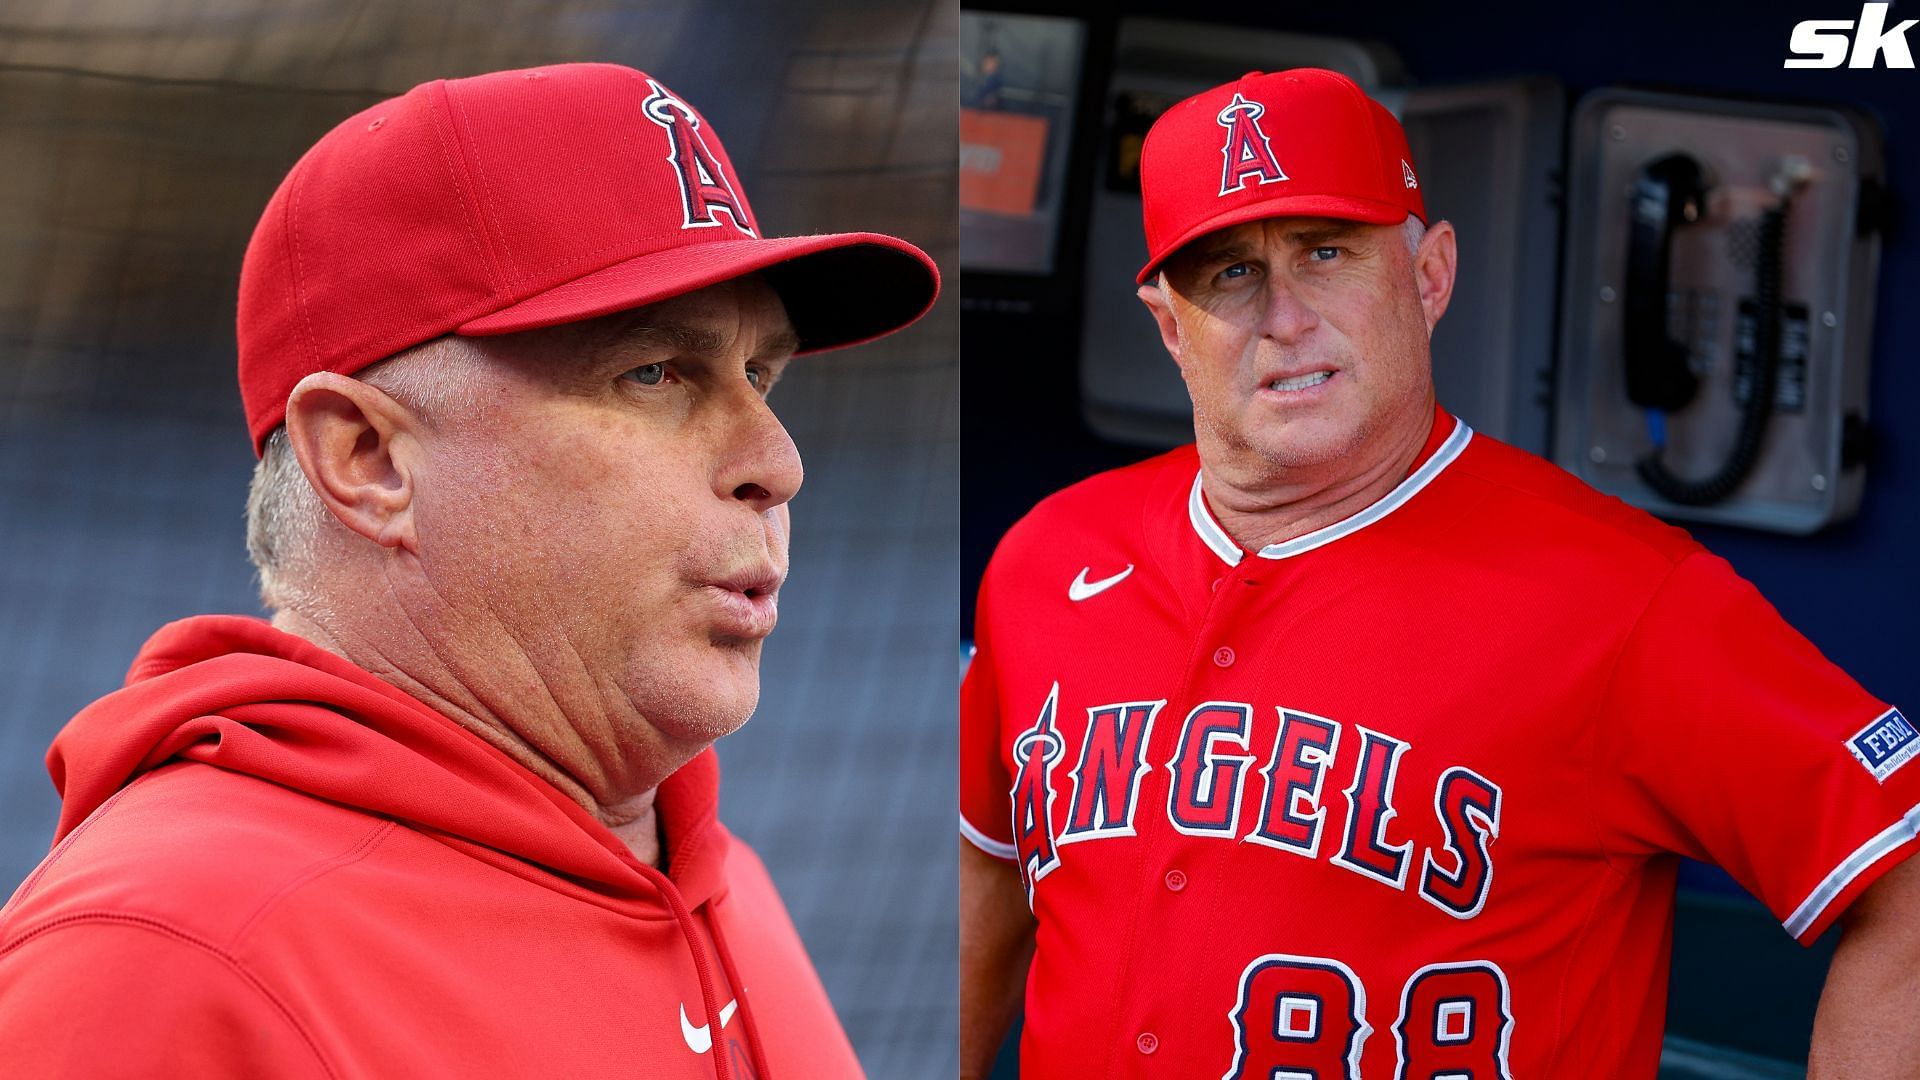 Los Angeles Angels manager Phil Nevin downcast as team loses game against Giants